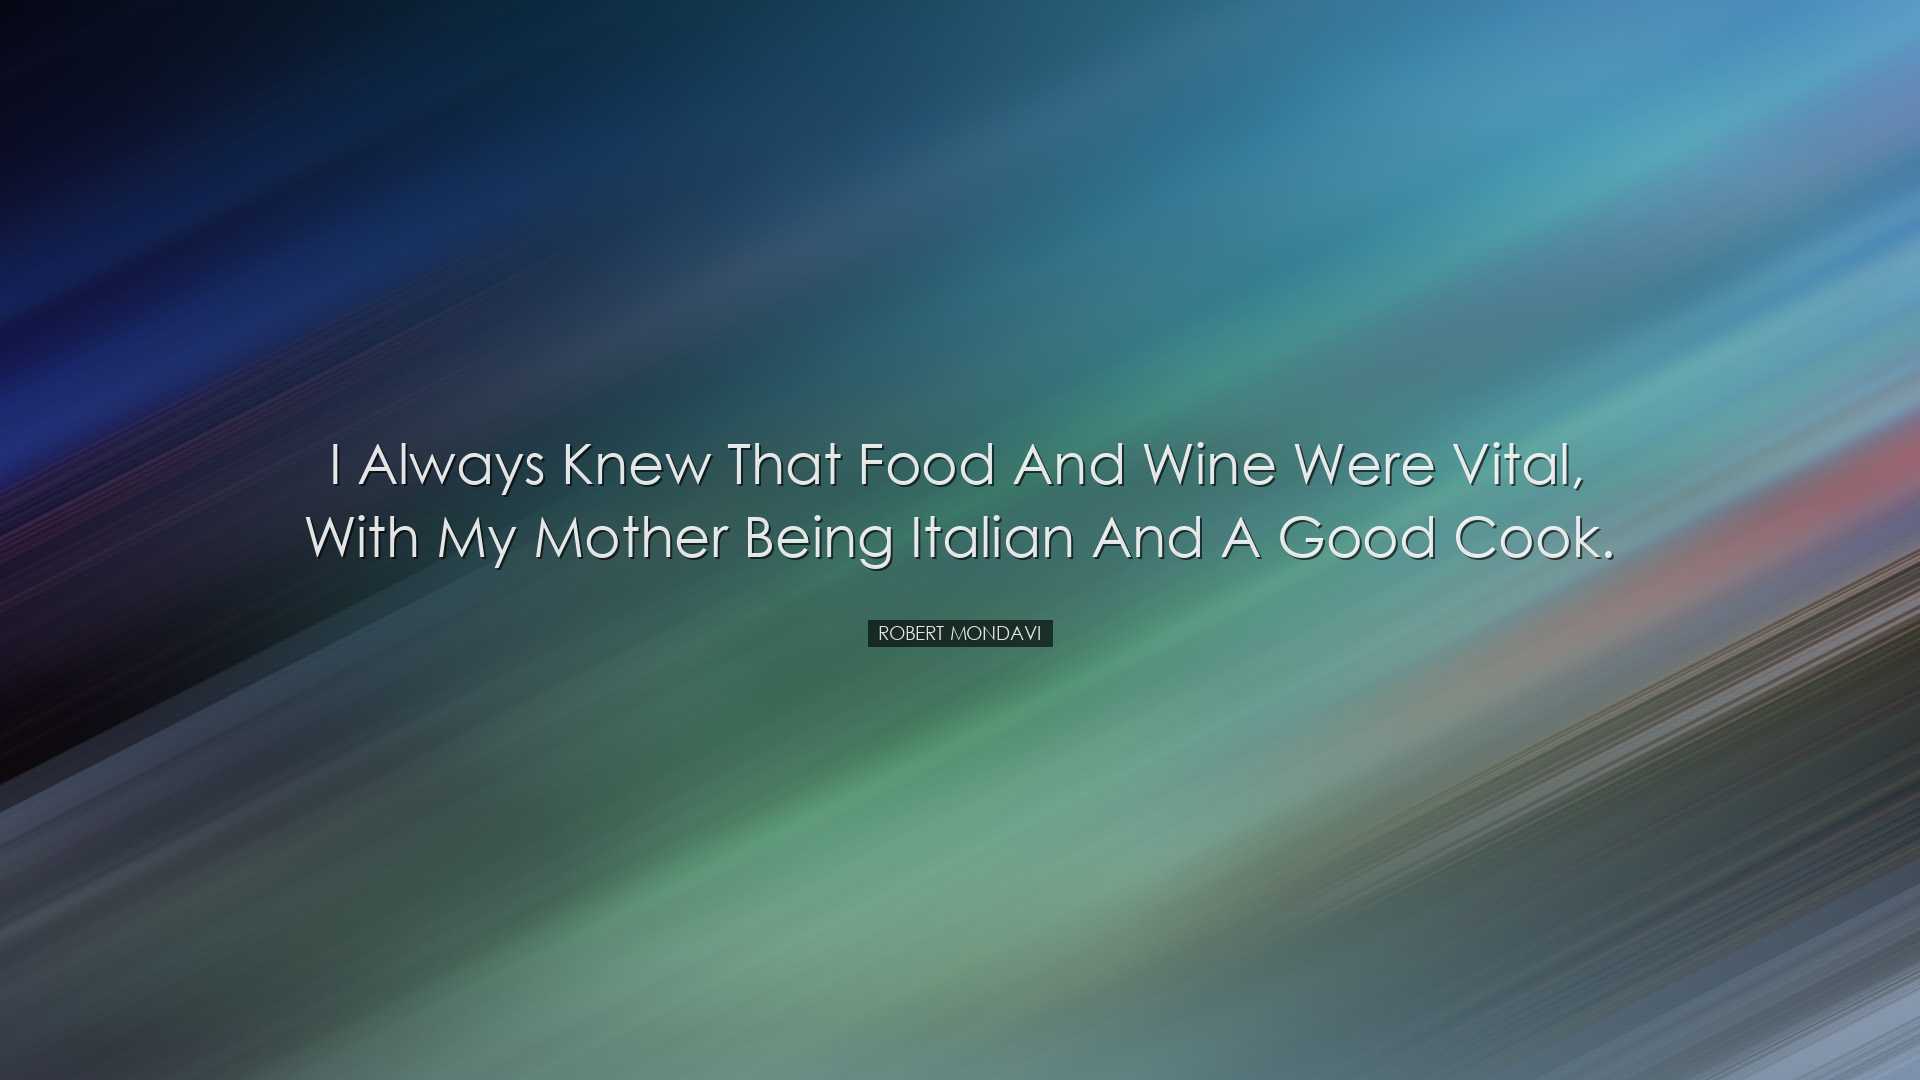 I always knew that food and wine were vital, with my mother being